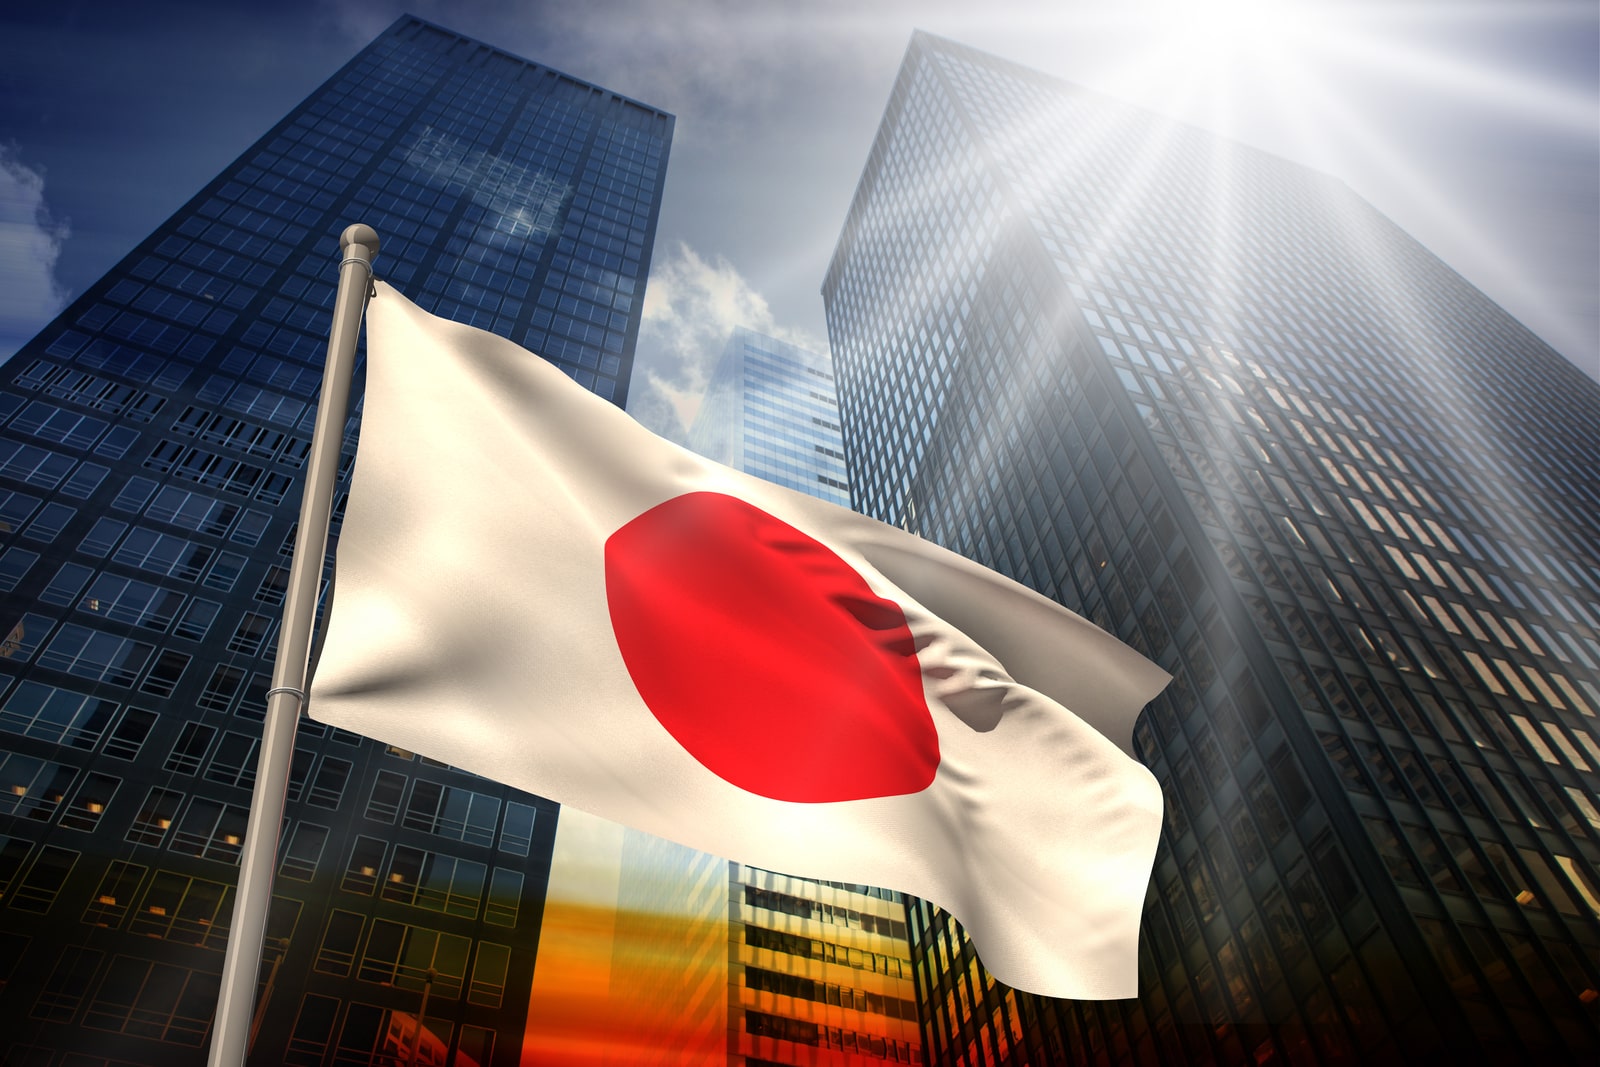 According to the IMF, Japan is the third wealthiest country in the world